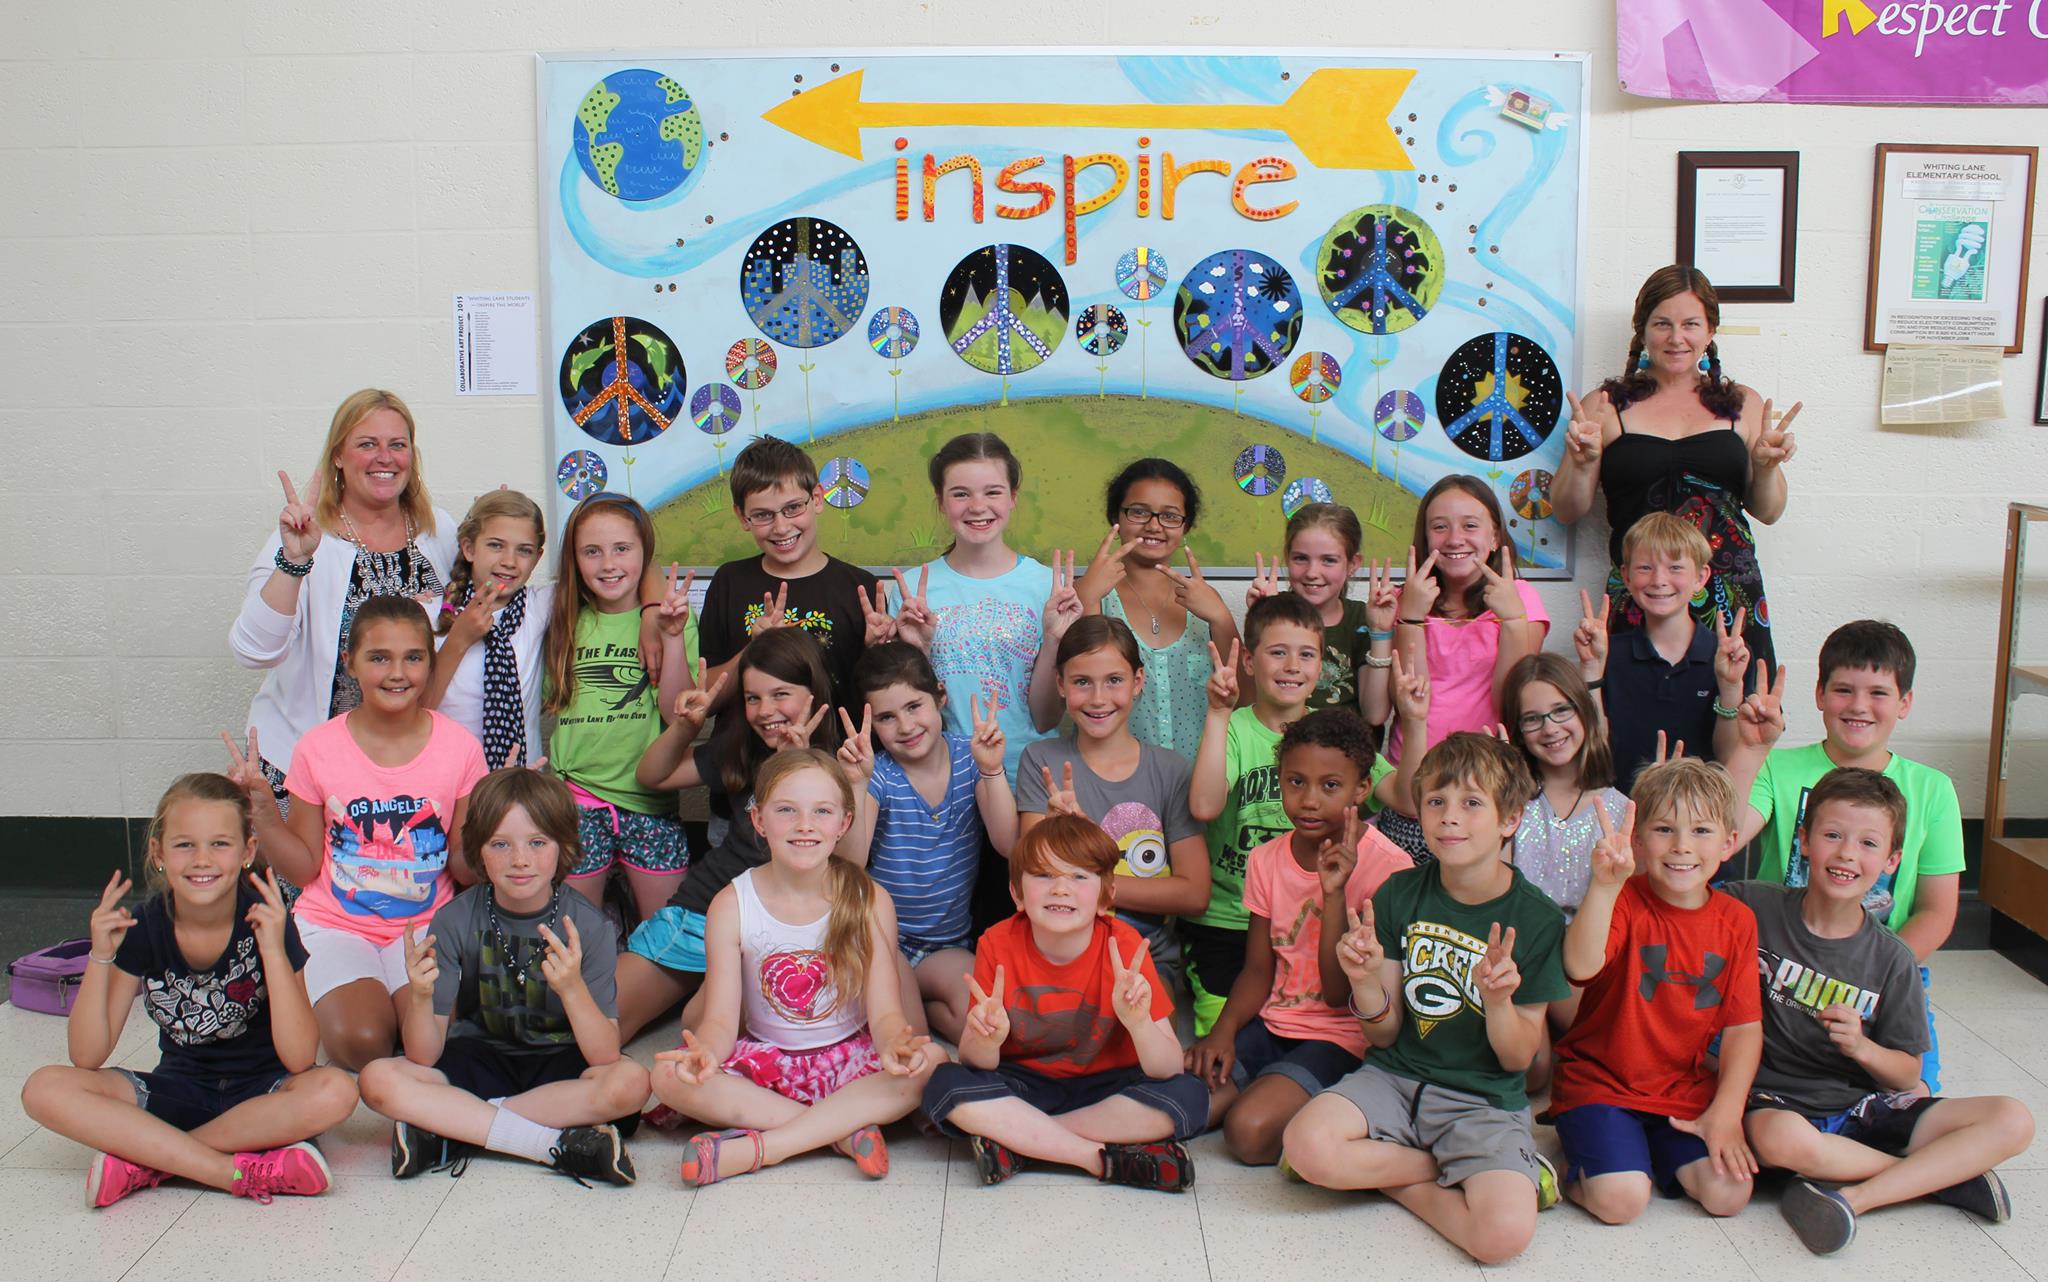 Whiting Lane students pose in front of a new work of art they created with the assistance of West Hartford artist Stefanie Marco Lantz. The piece will be permanently installed in the school's lobby. Photo courtesy of Heather Bushnell, Whiting Lane School